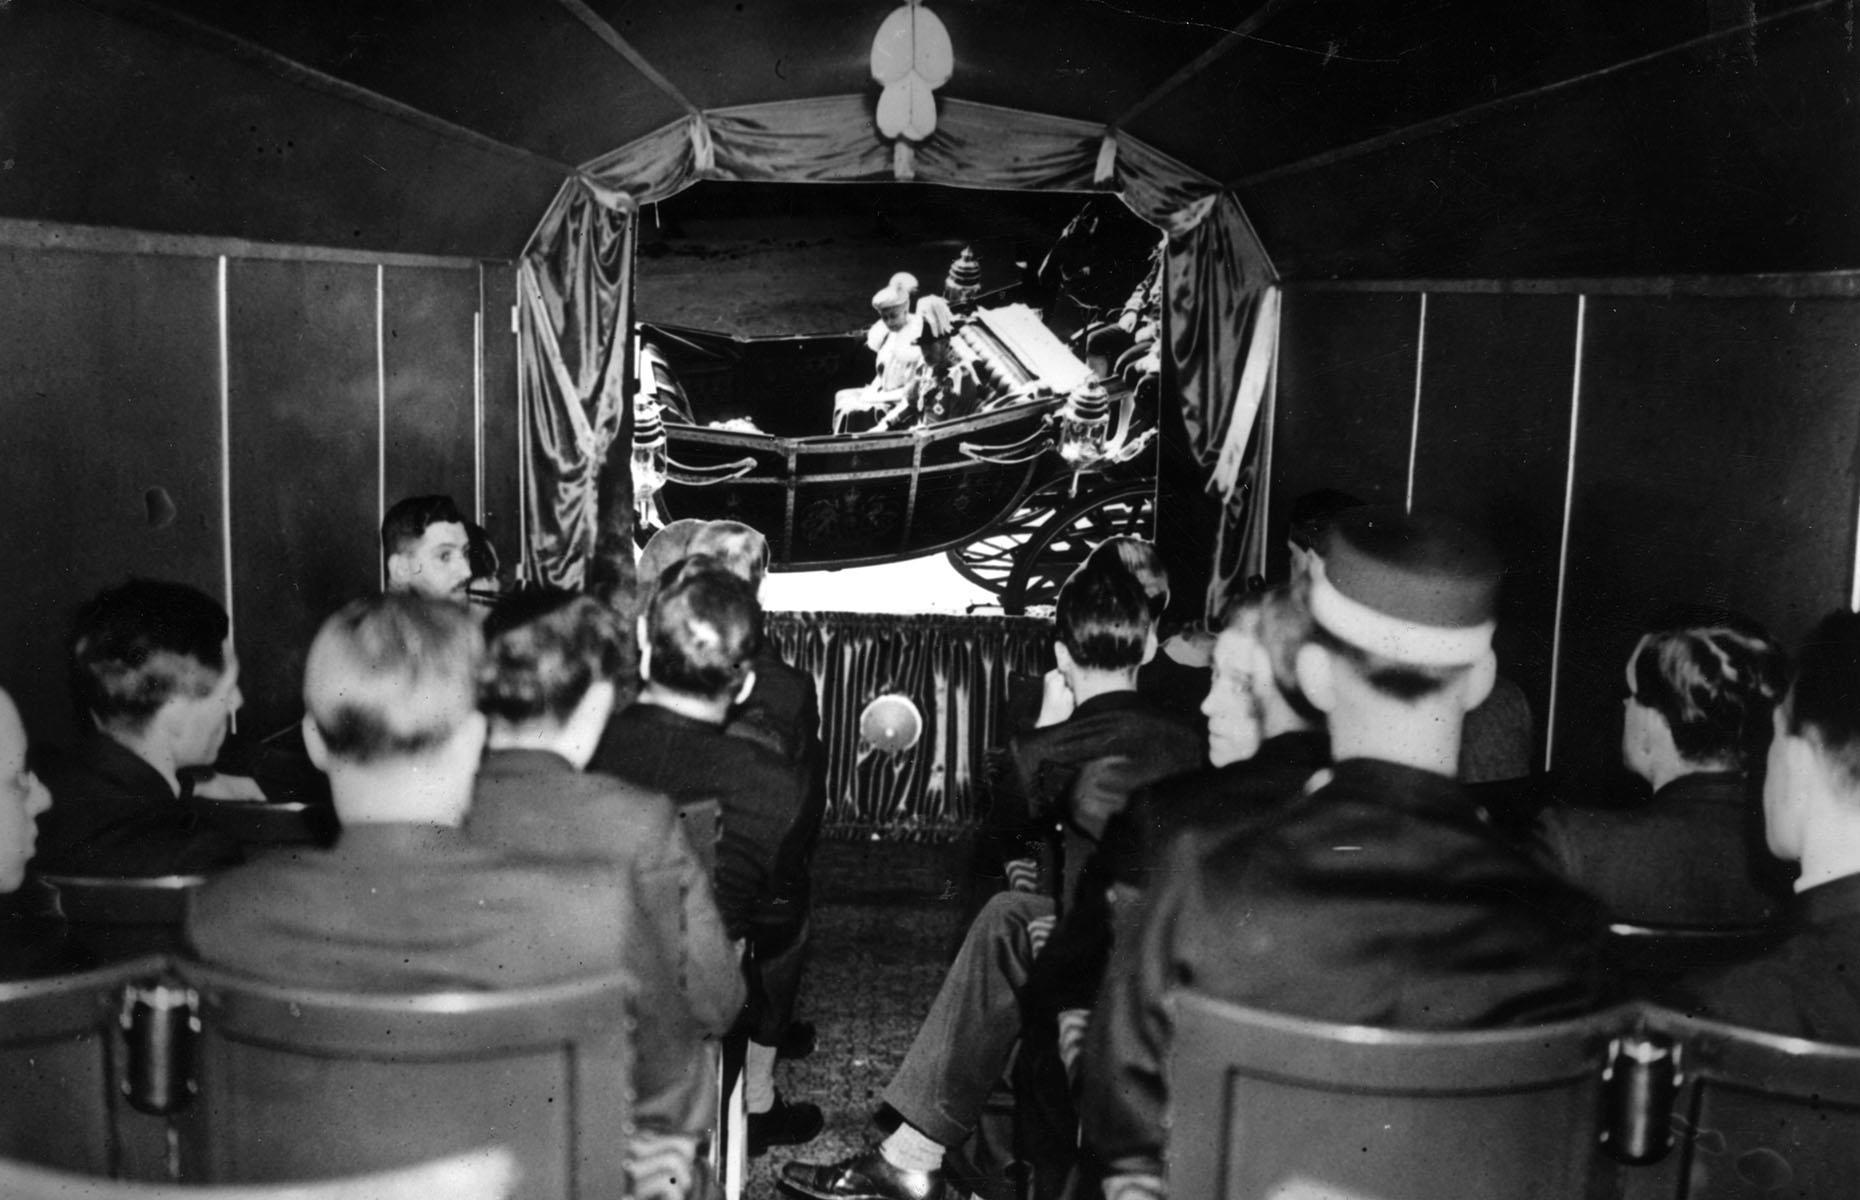 The UK took a similar approach in 1935 when King George V's Silver Jubilee film was shown on board the train departing London King's Cross to Peterborough.